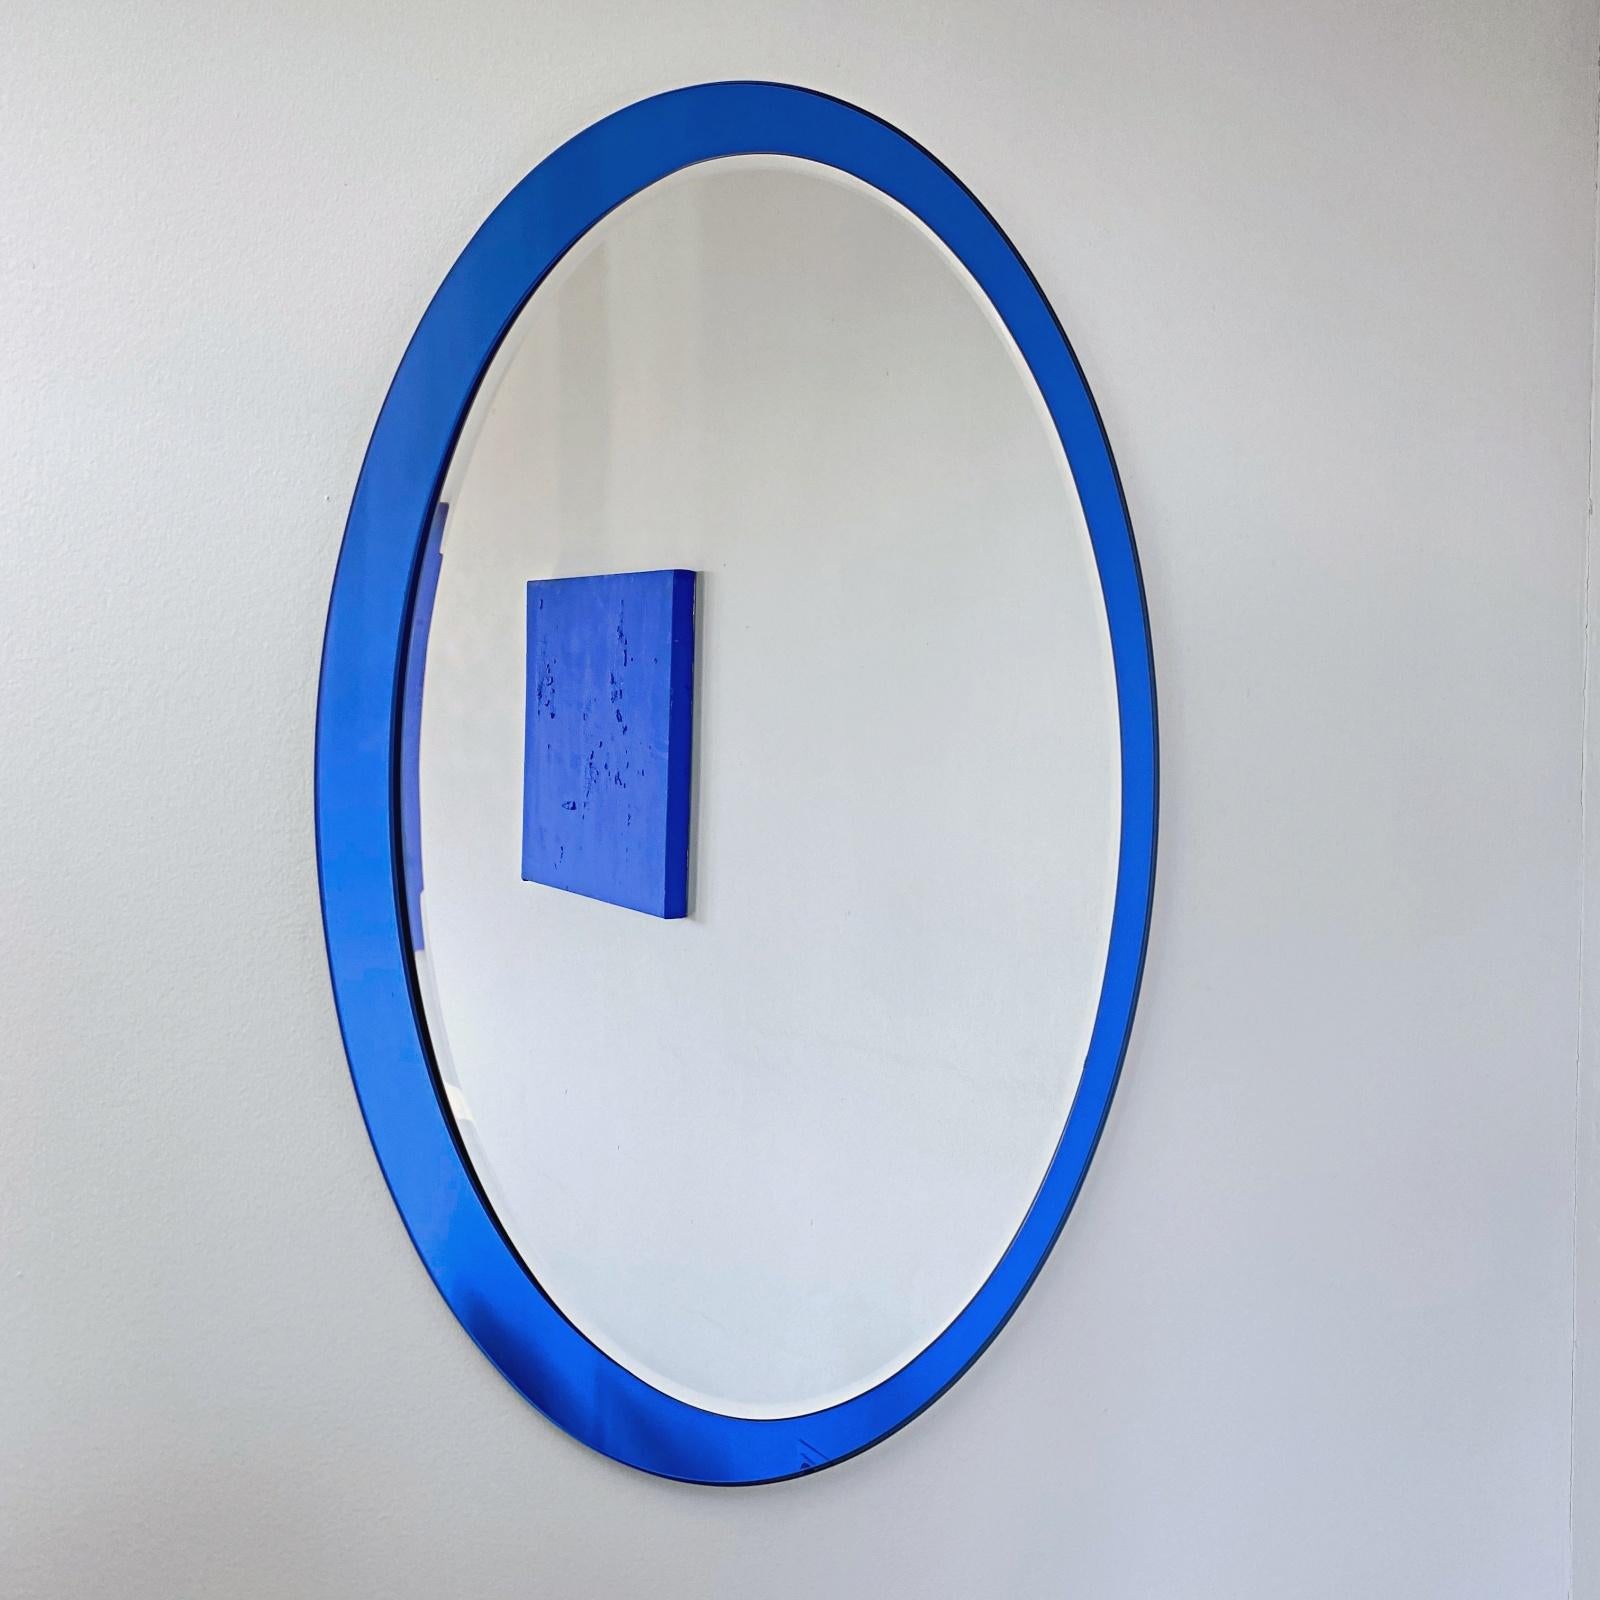 Beautiful Fontana Arte labeled cobalt blue edged wall mirror made in 1960s, Italy. The mirror can also be hung horizontally. The mirror is in a very good condition, without any chips or scratches.

Dimensions:
H 81 cm / 31.9 in
W 58 cm / 22.8